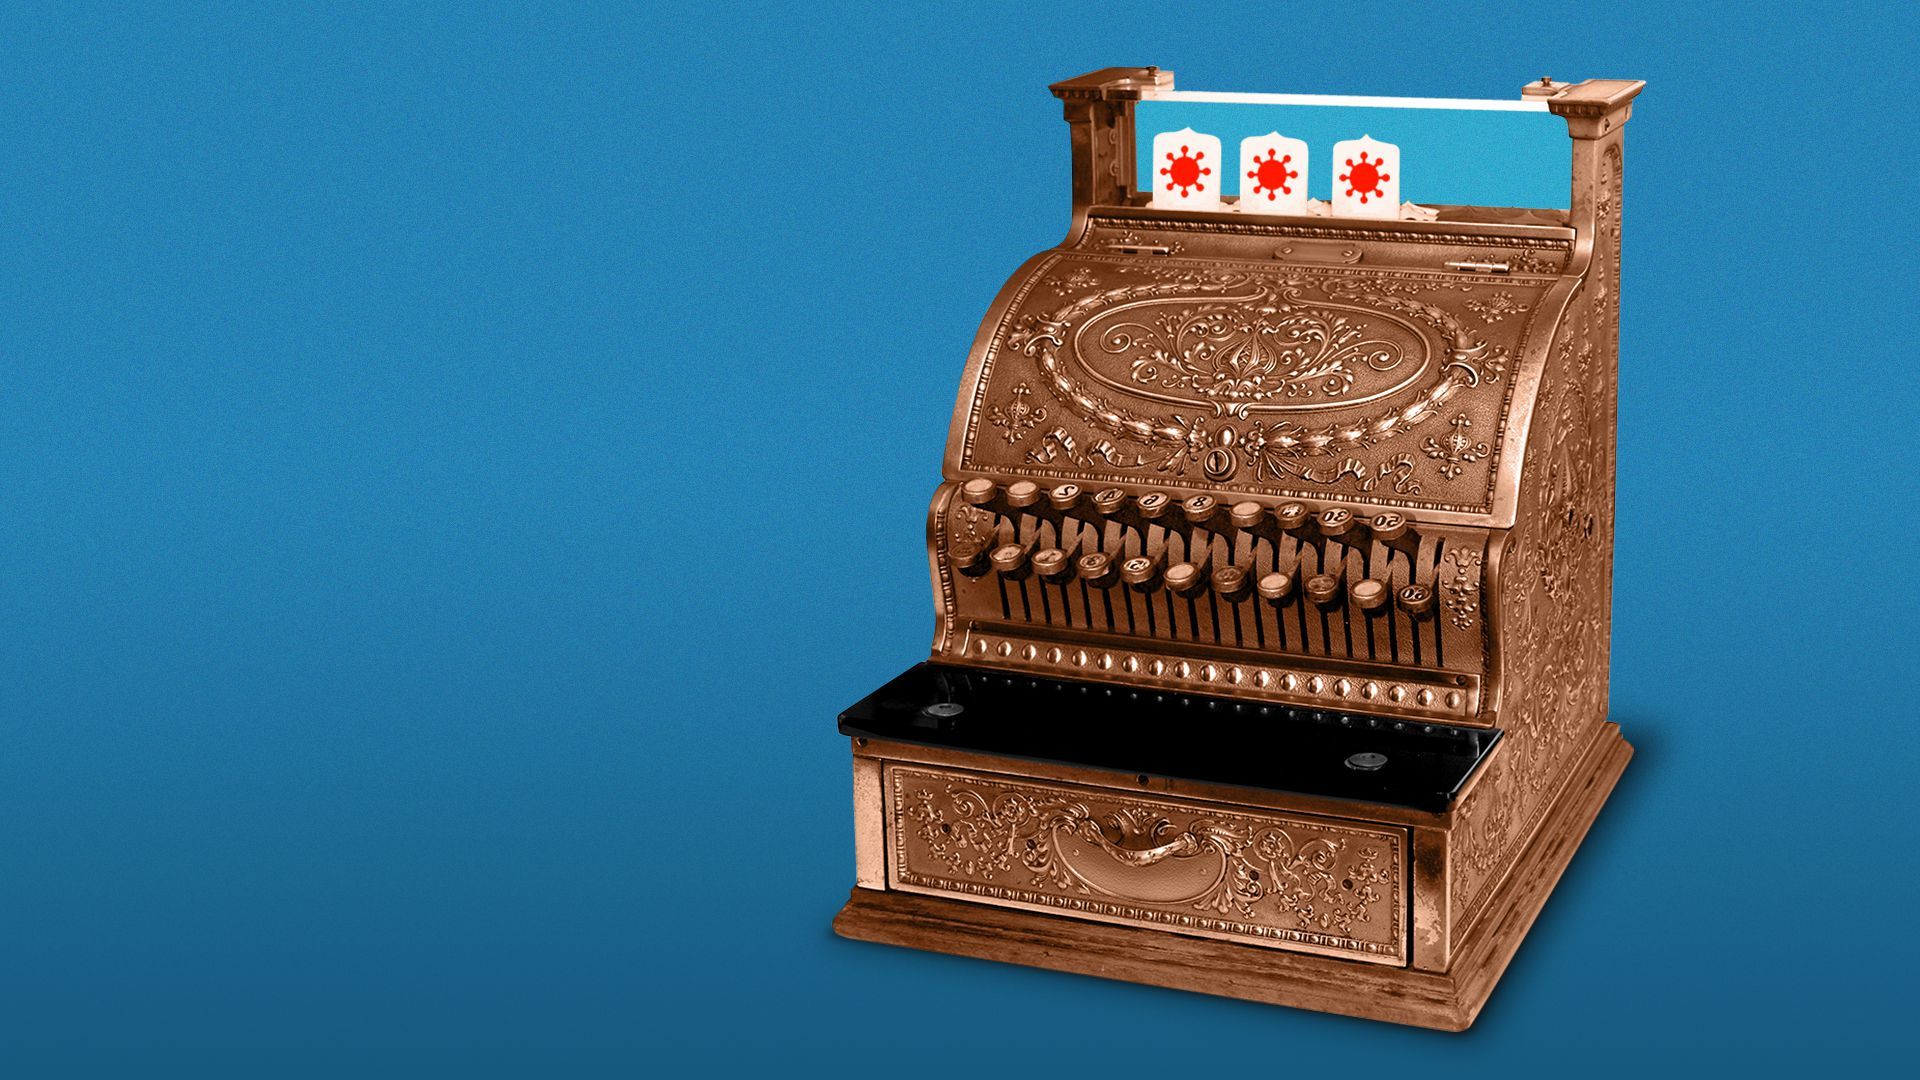 Illustration of a vintage cash register with covid cells on the display.